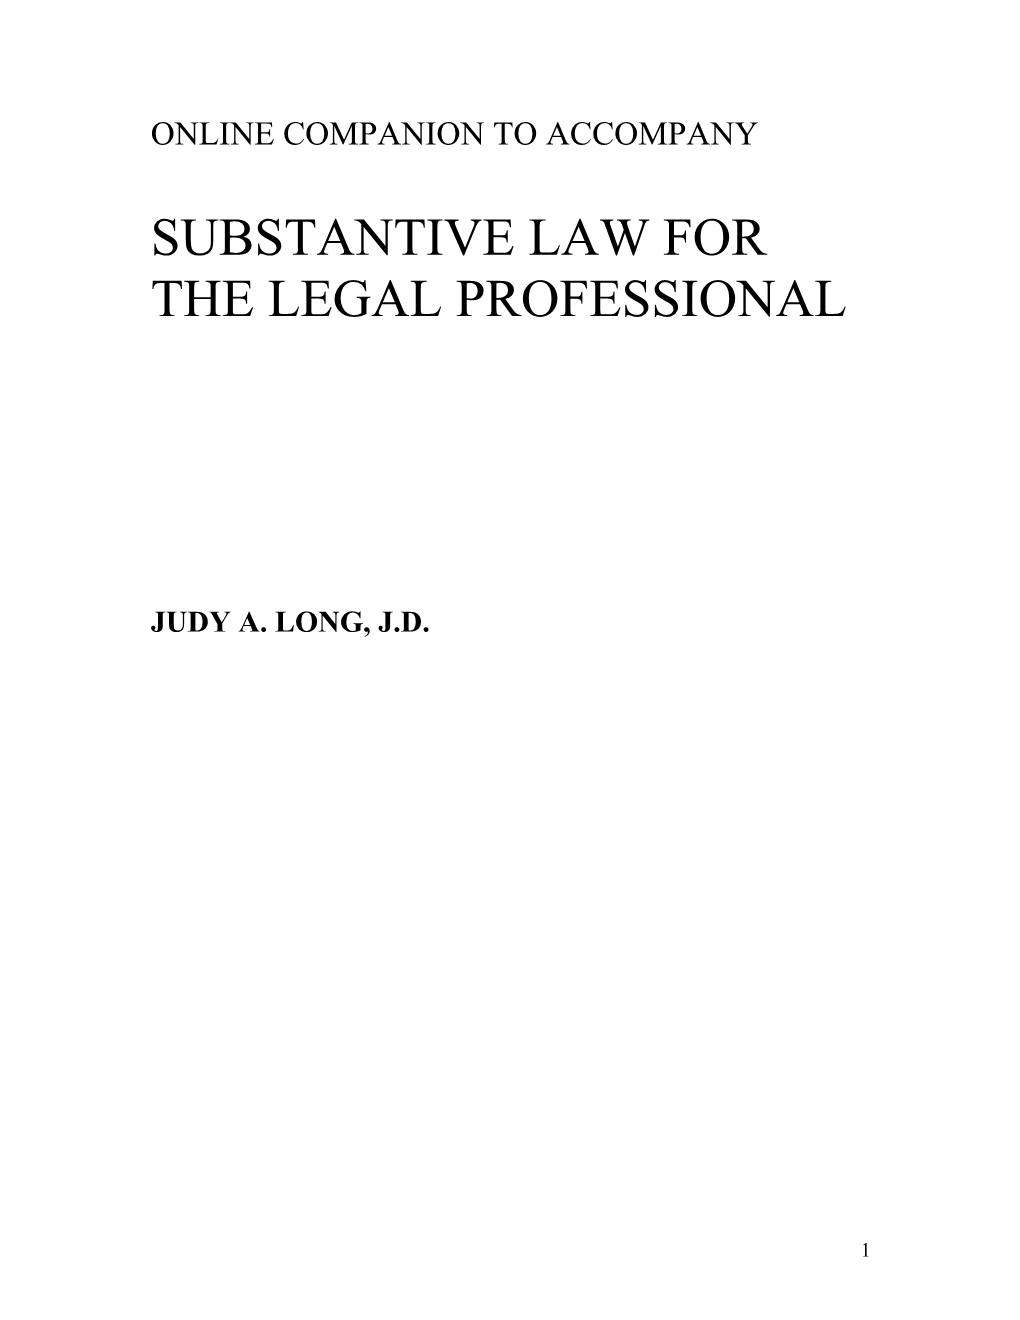 Substantive Law for the Legal Professional